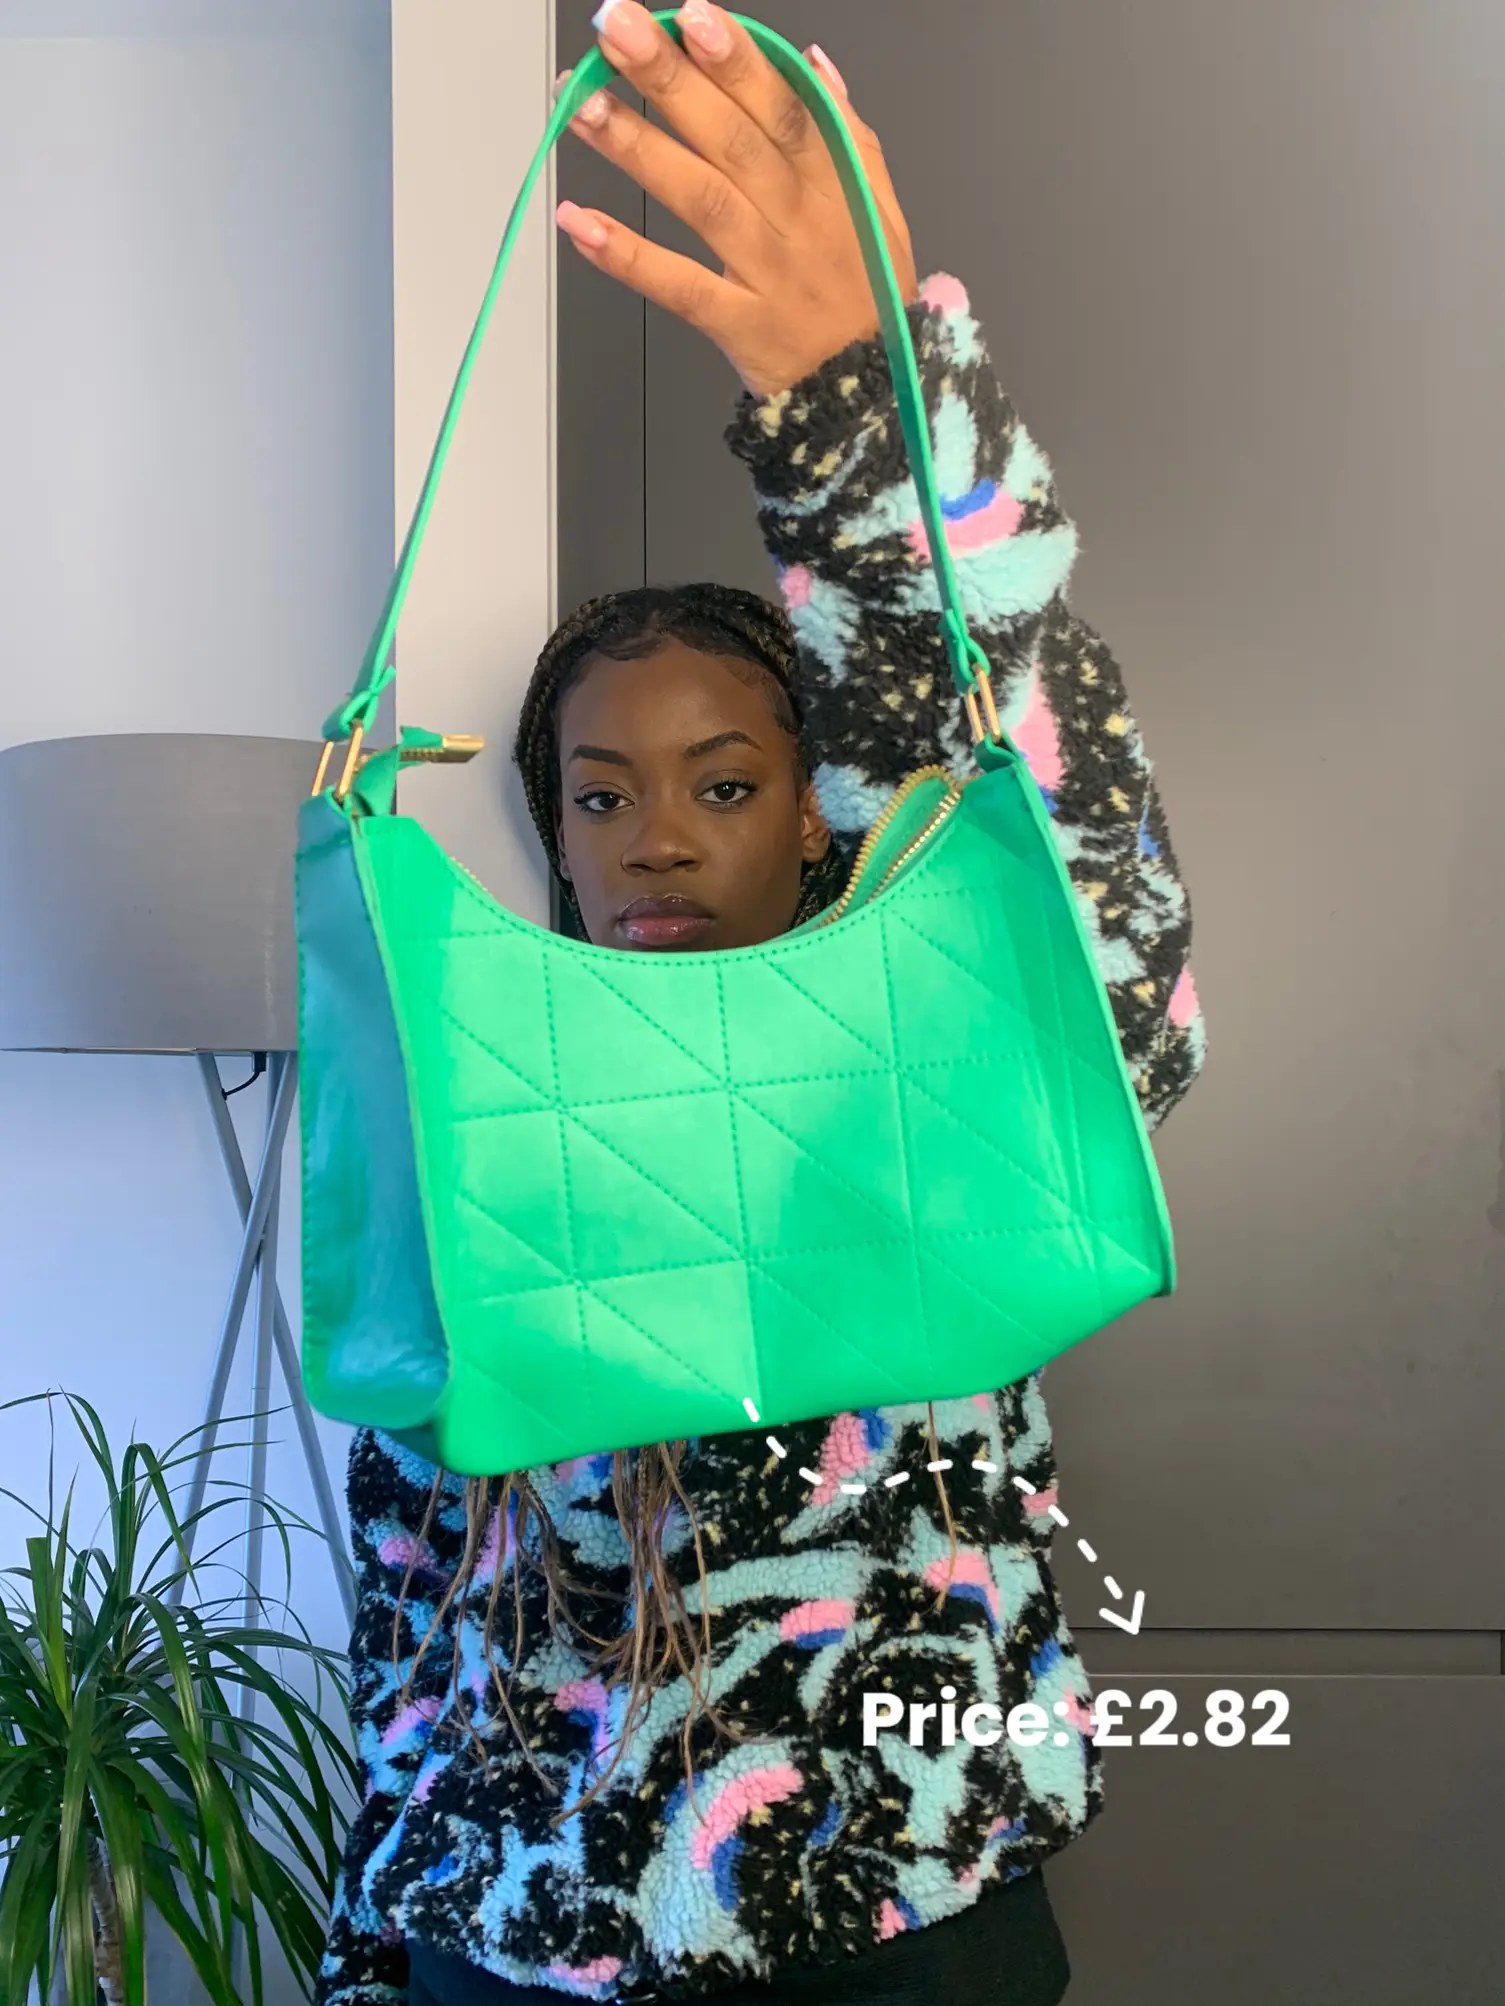 SHEIN BAG REVIEW 🖤, Gallery posted by Becki Ball